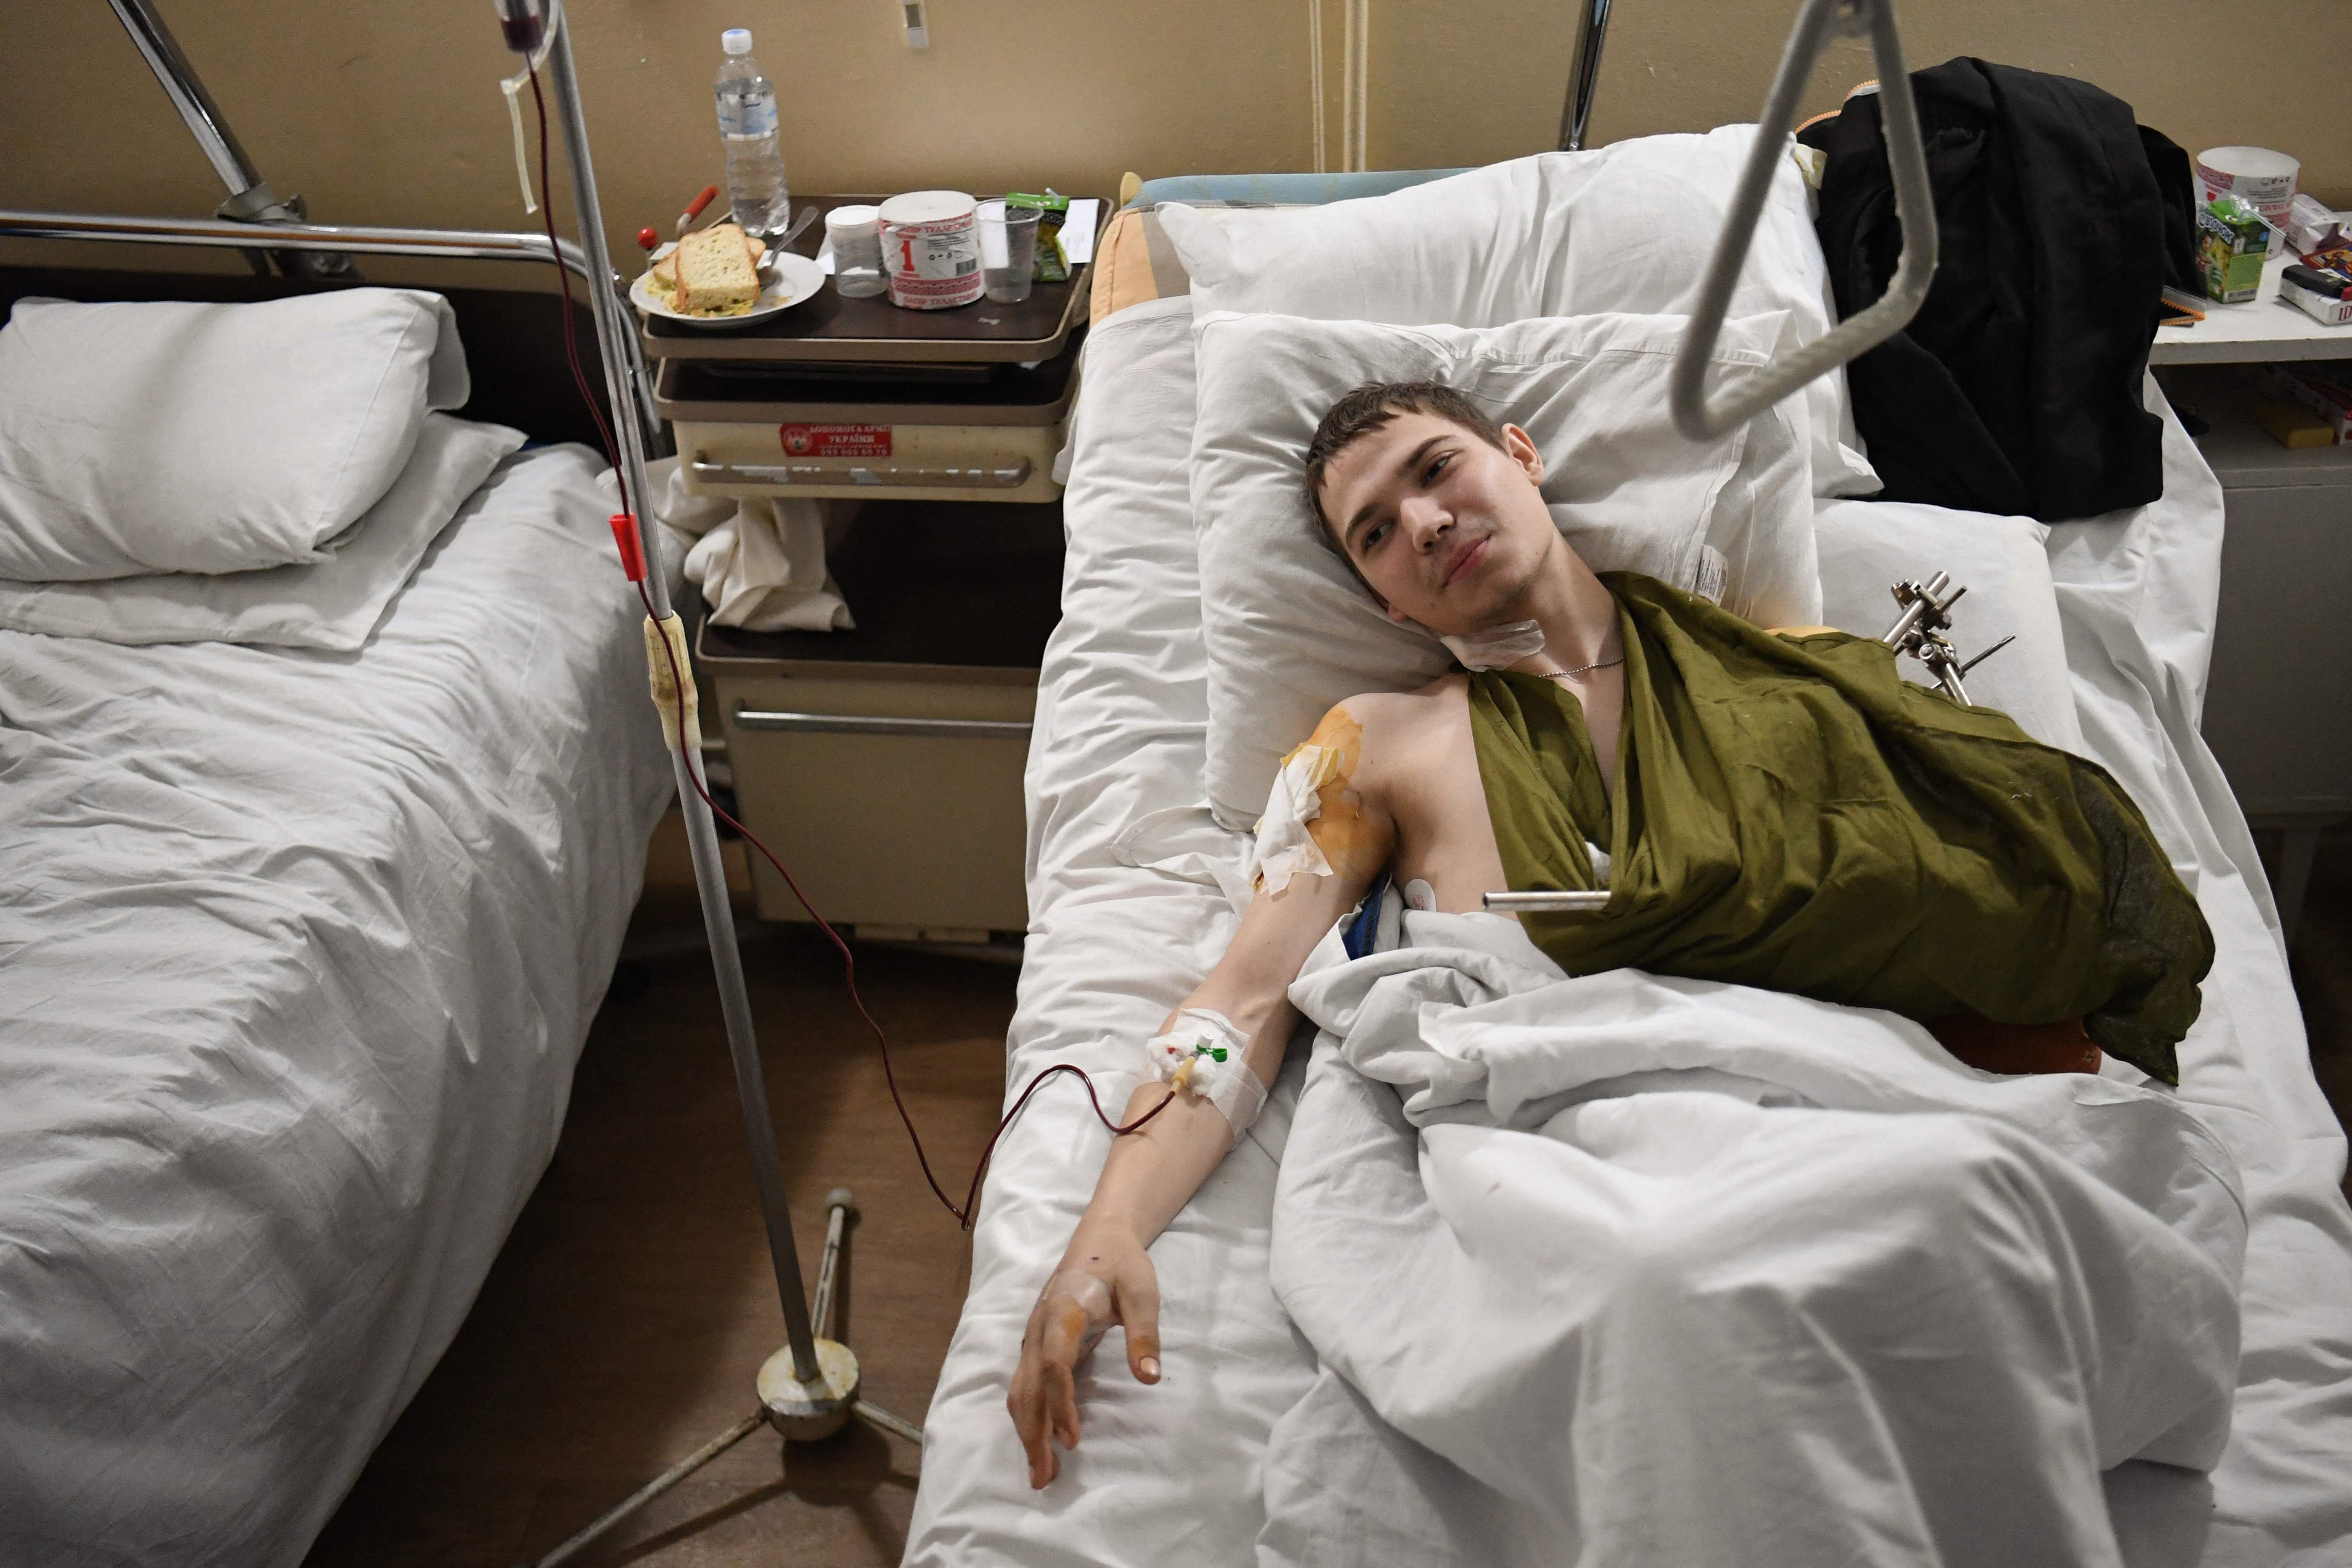 A 19 year old Ukrainian soldier named Yevhen lays in bed in a military hospital in Lviv